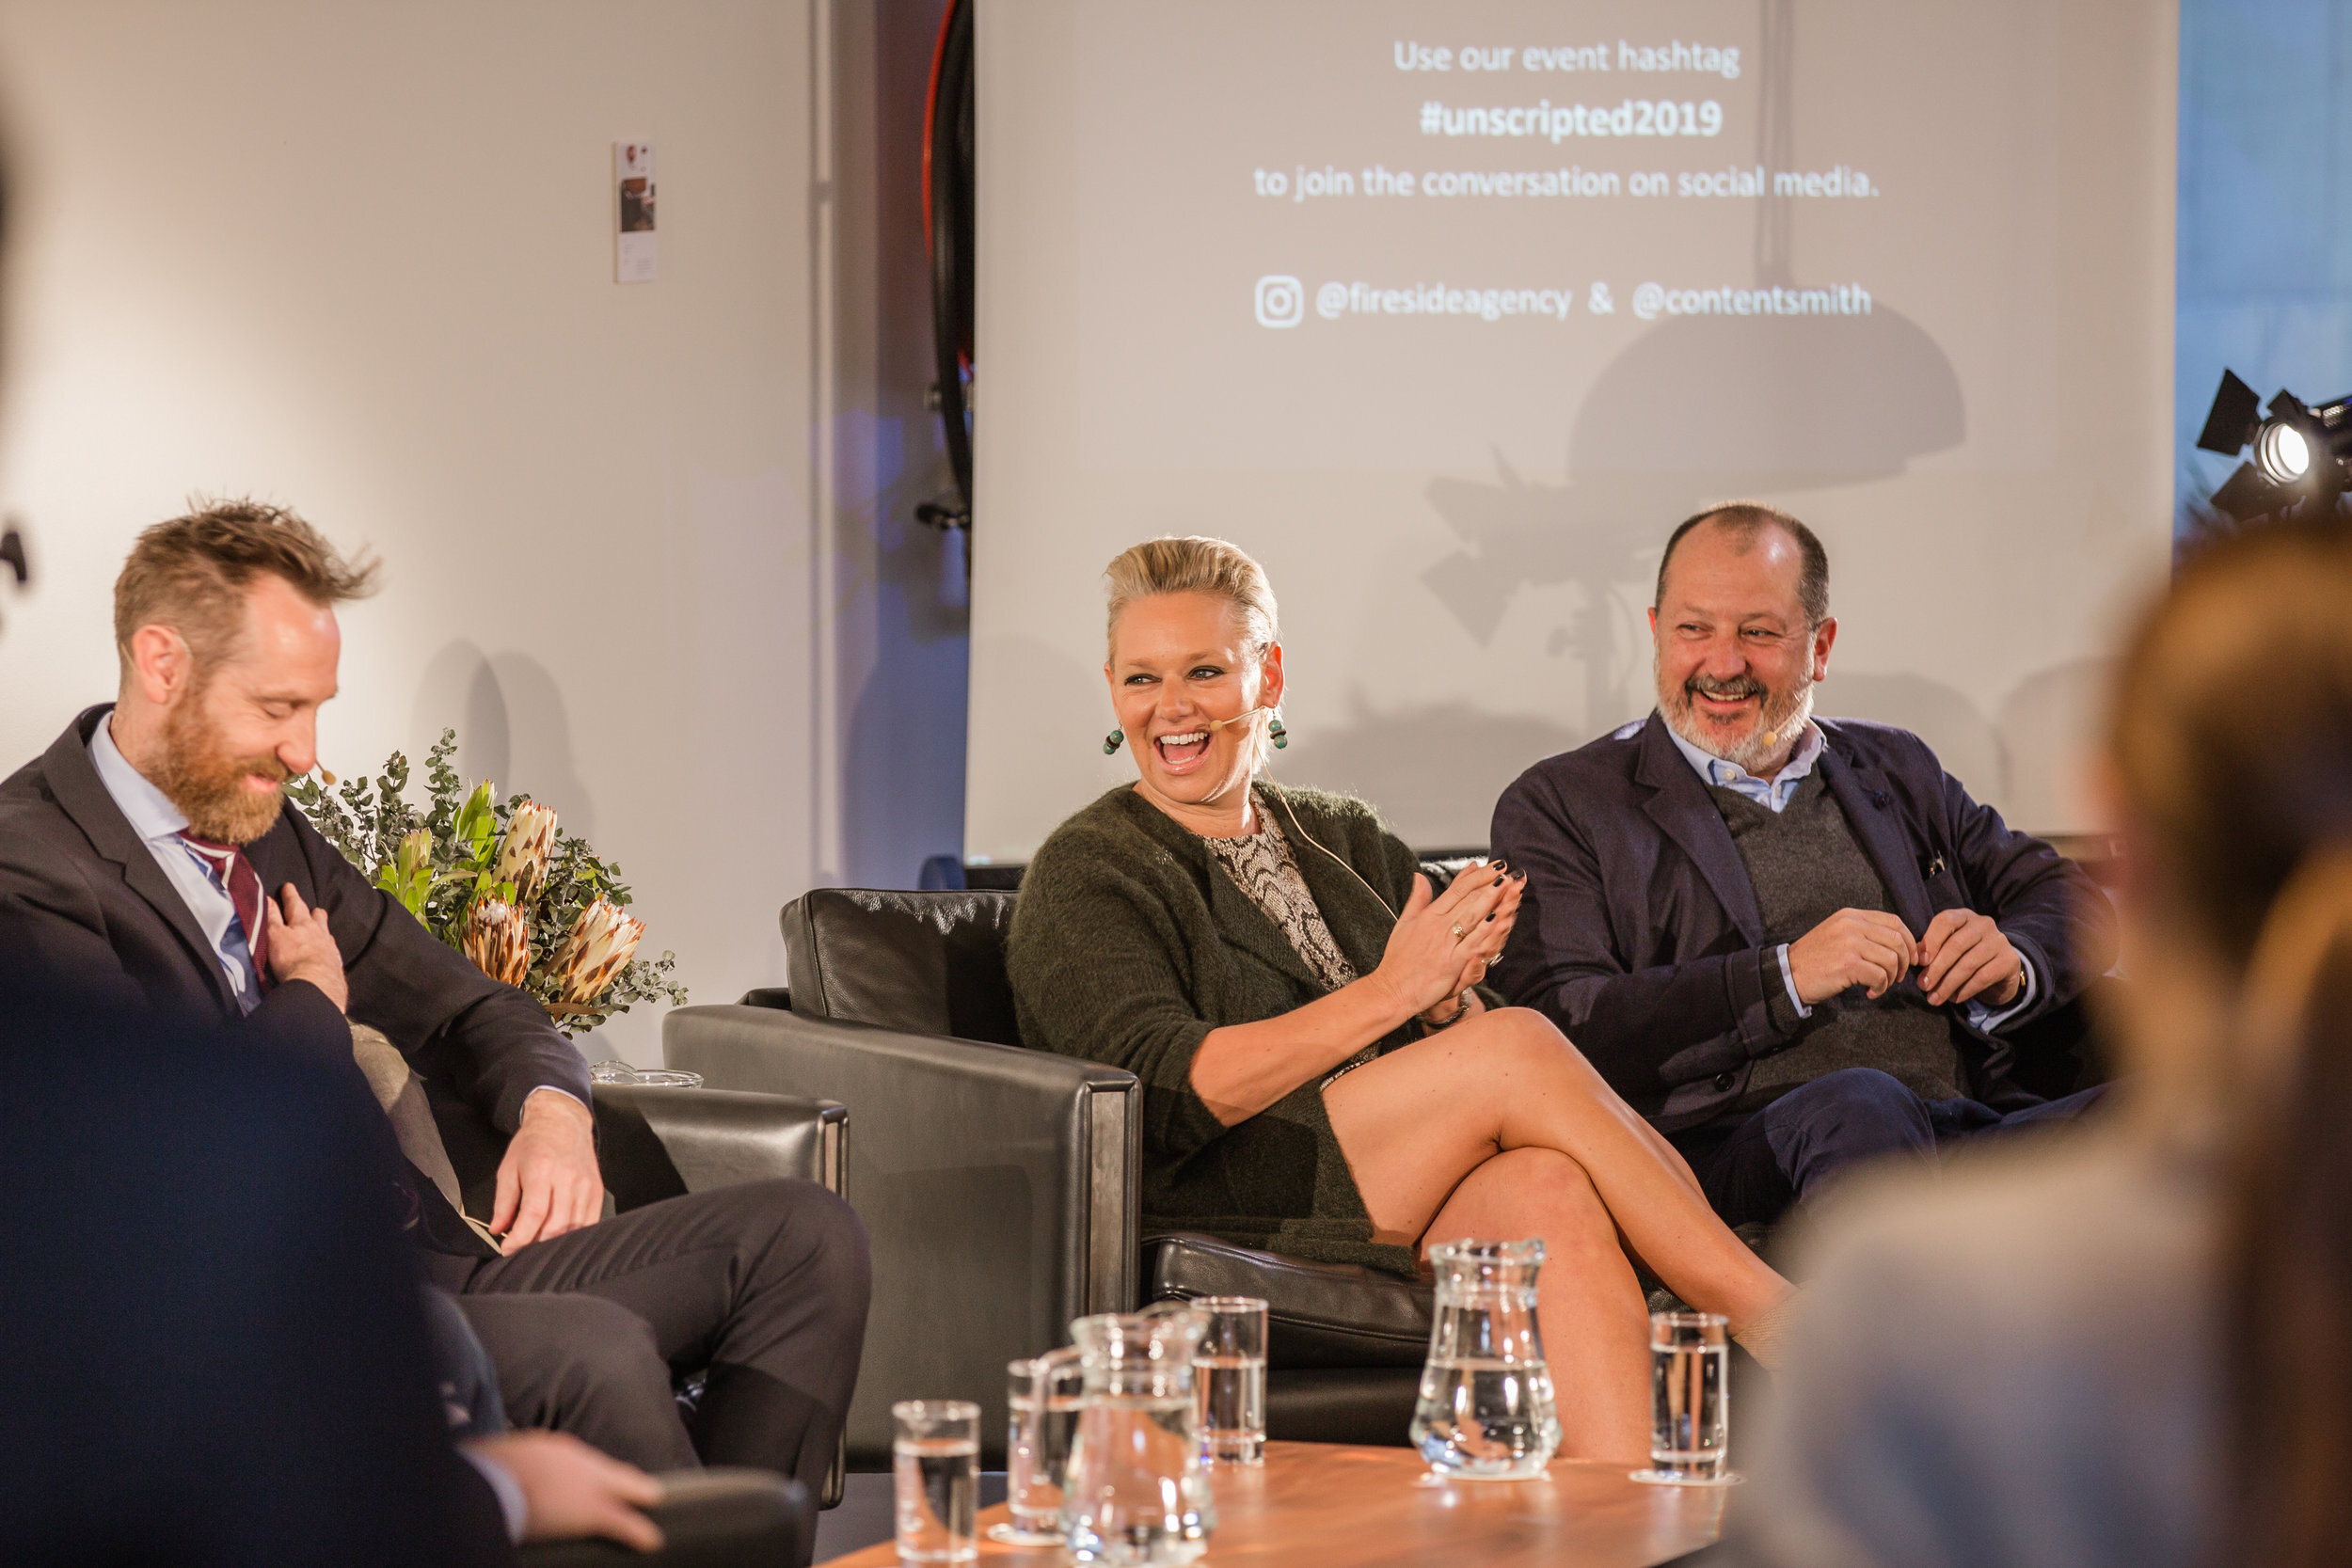 content-smith-unscripted-fireside-melbourne-capp-howcroft-HR48.jpg